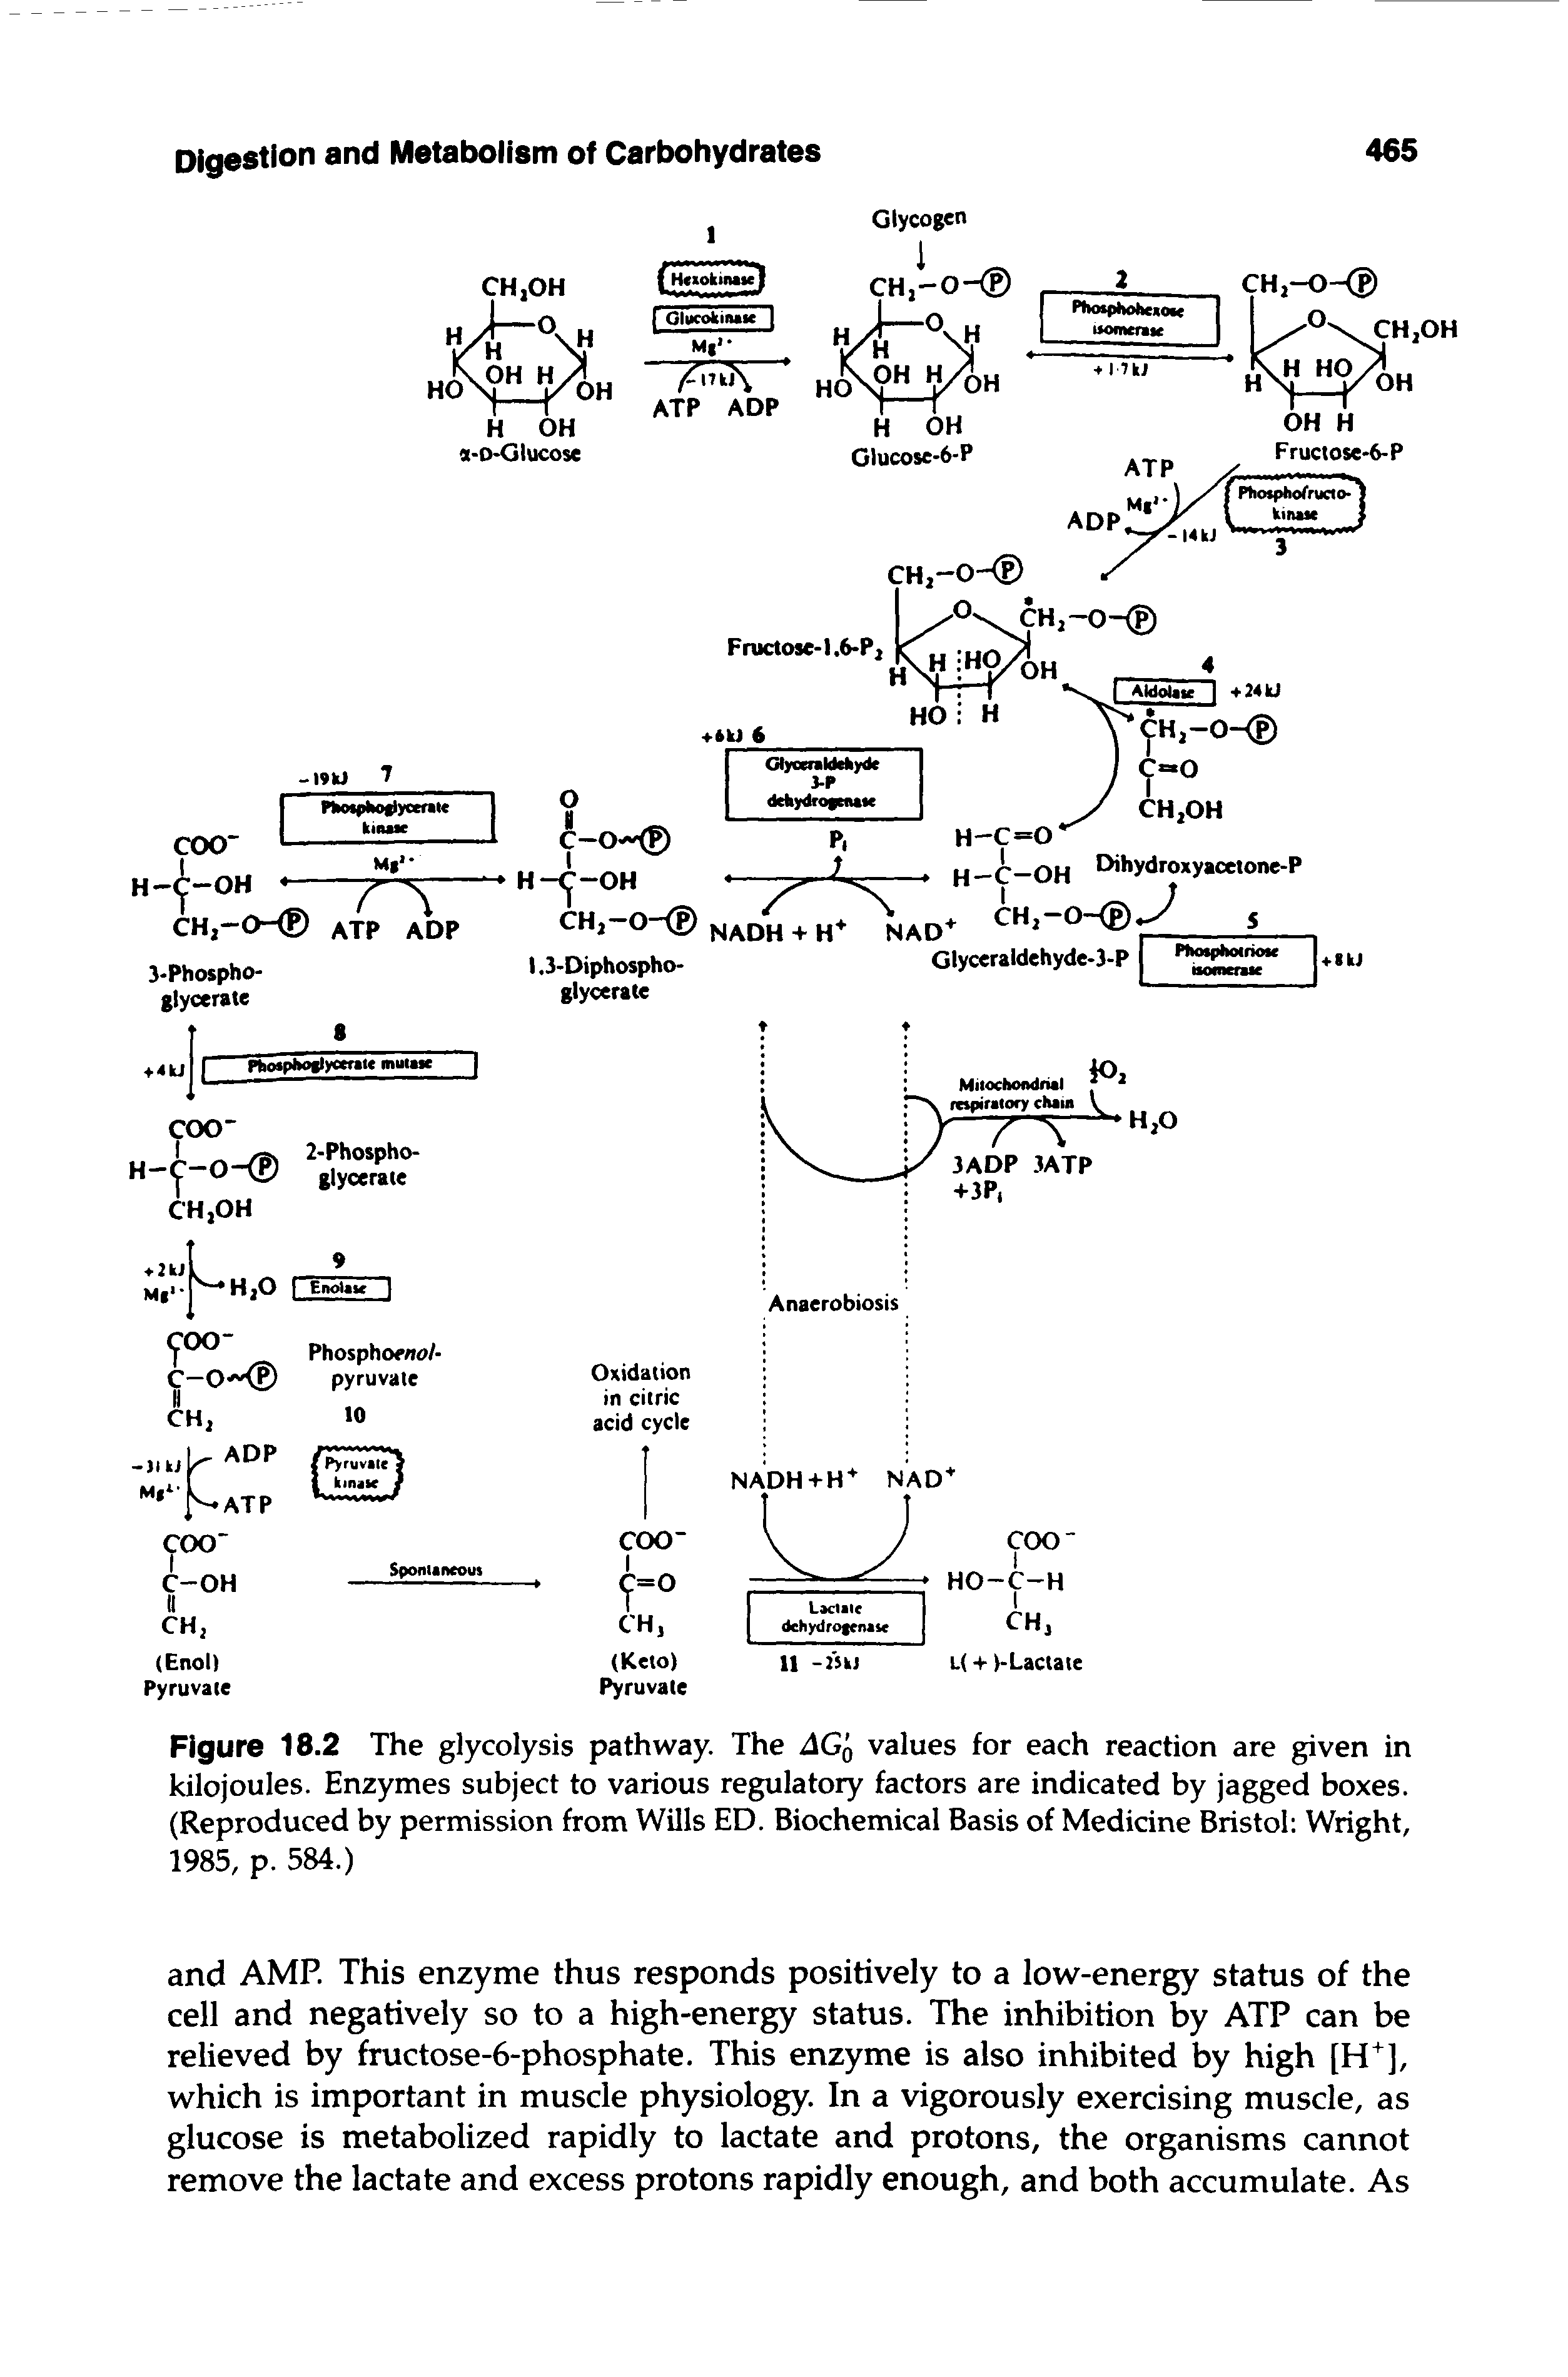 Figure 18.2 The glycolysis pathway. The AGq values for each reaction are given in kilojoules. Enzymes subject to various regulatory factors are indicated by jagged boxes. (Reproduced by permission from Wills ED. Biochemical Basis of Medicine Bristol Wright, 1985, p. 584.)...